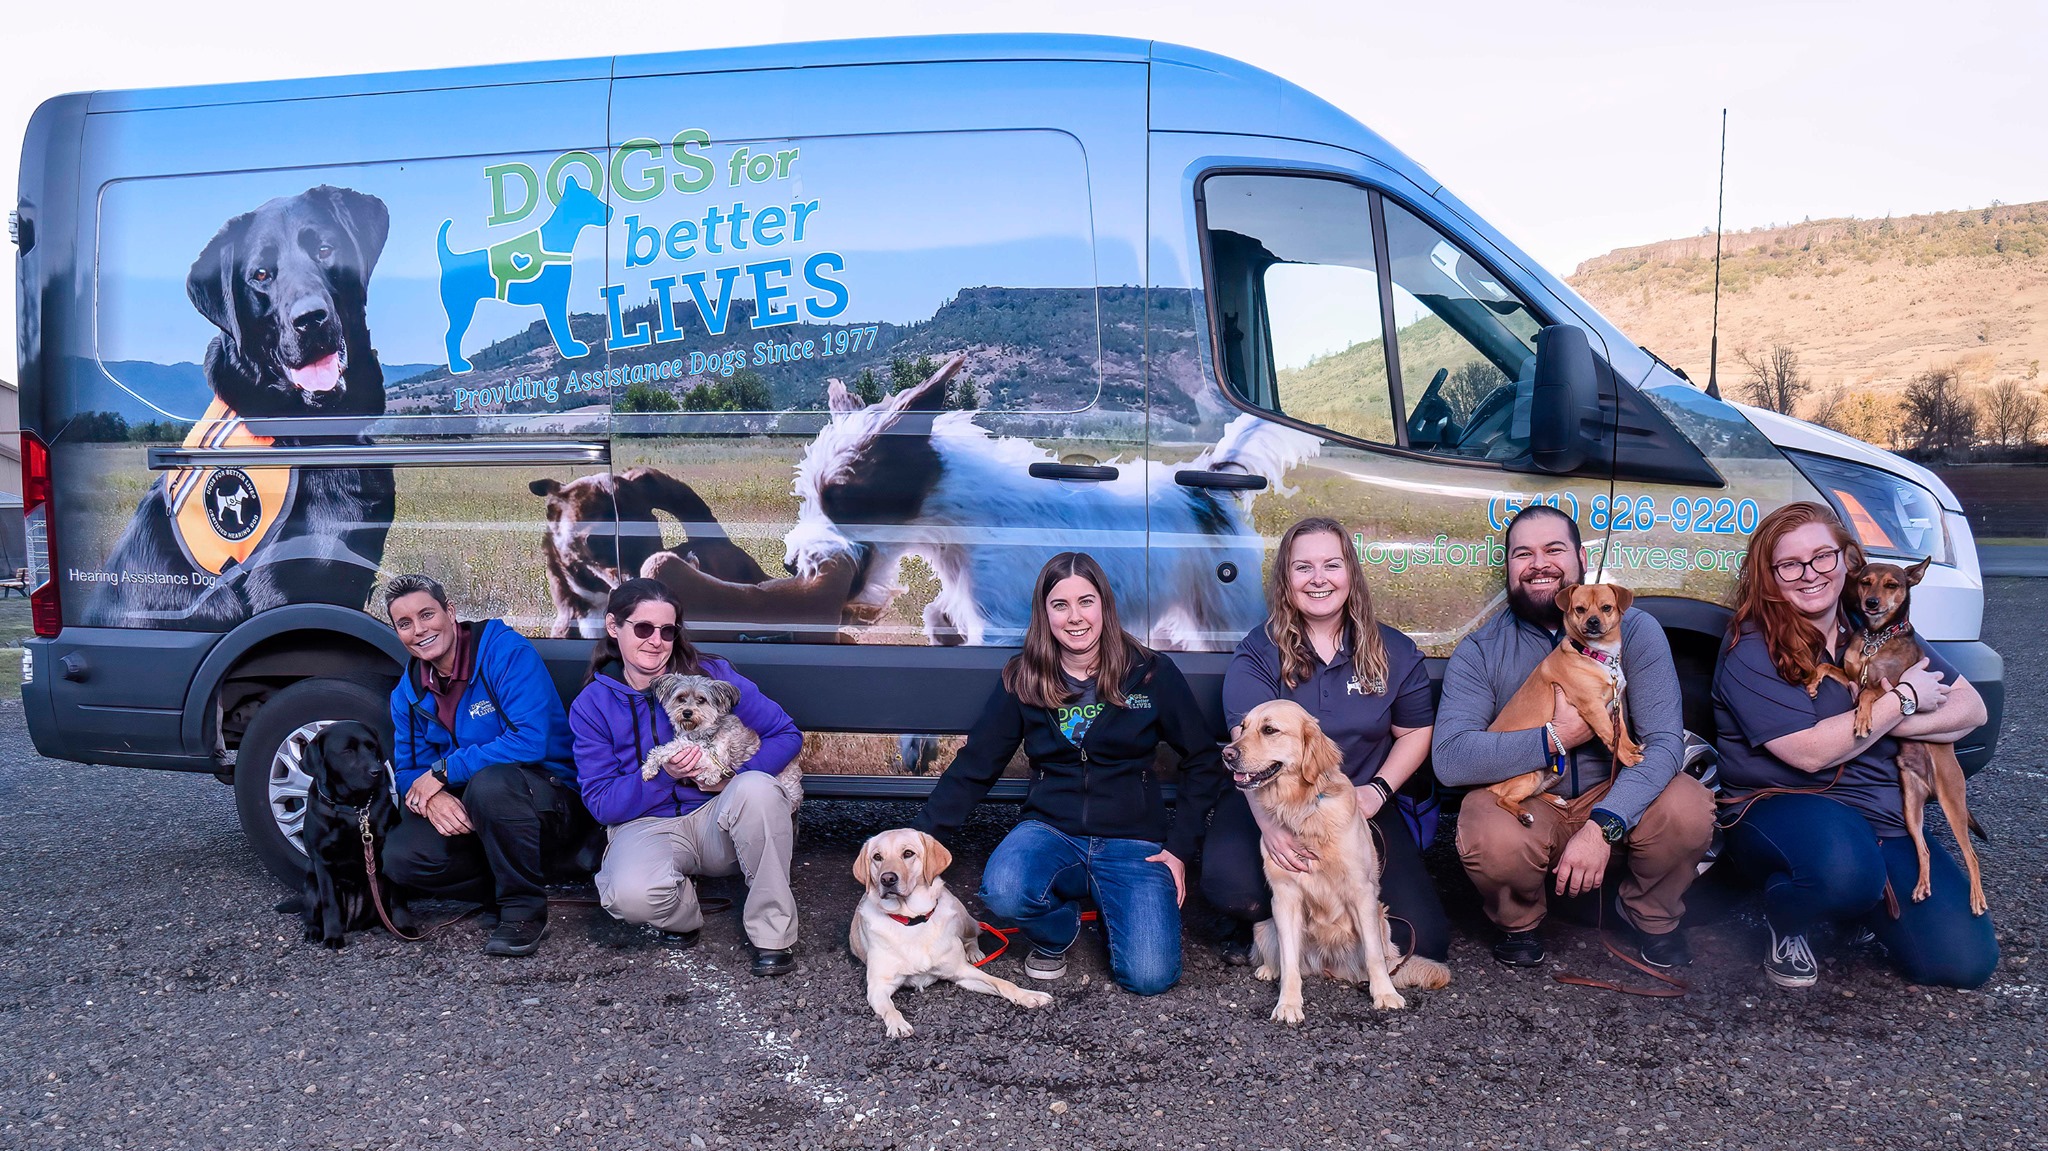 Dogs for Better Lives standing outside of vehicle